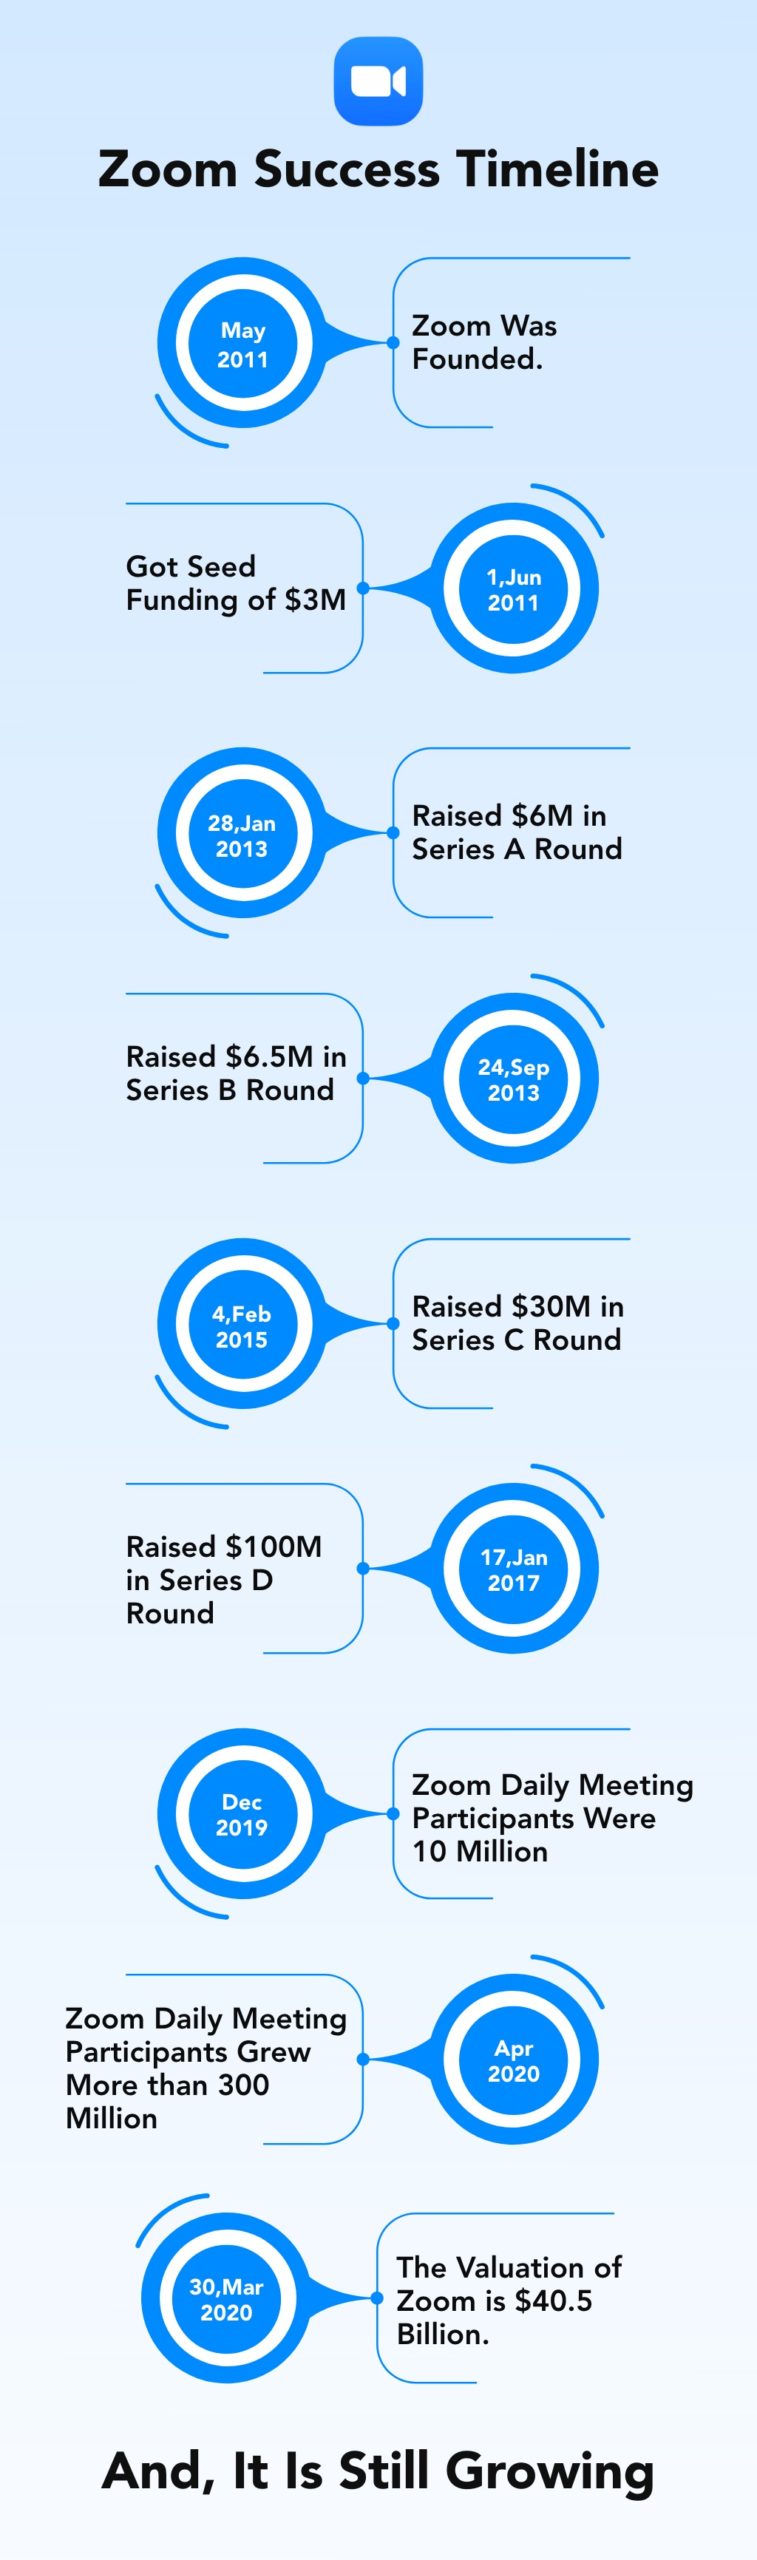 Zoom Success Timeline and Funding